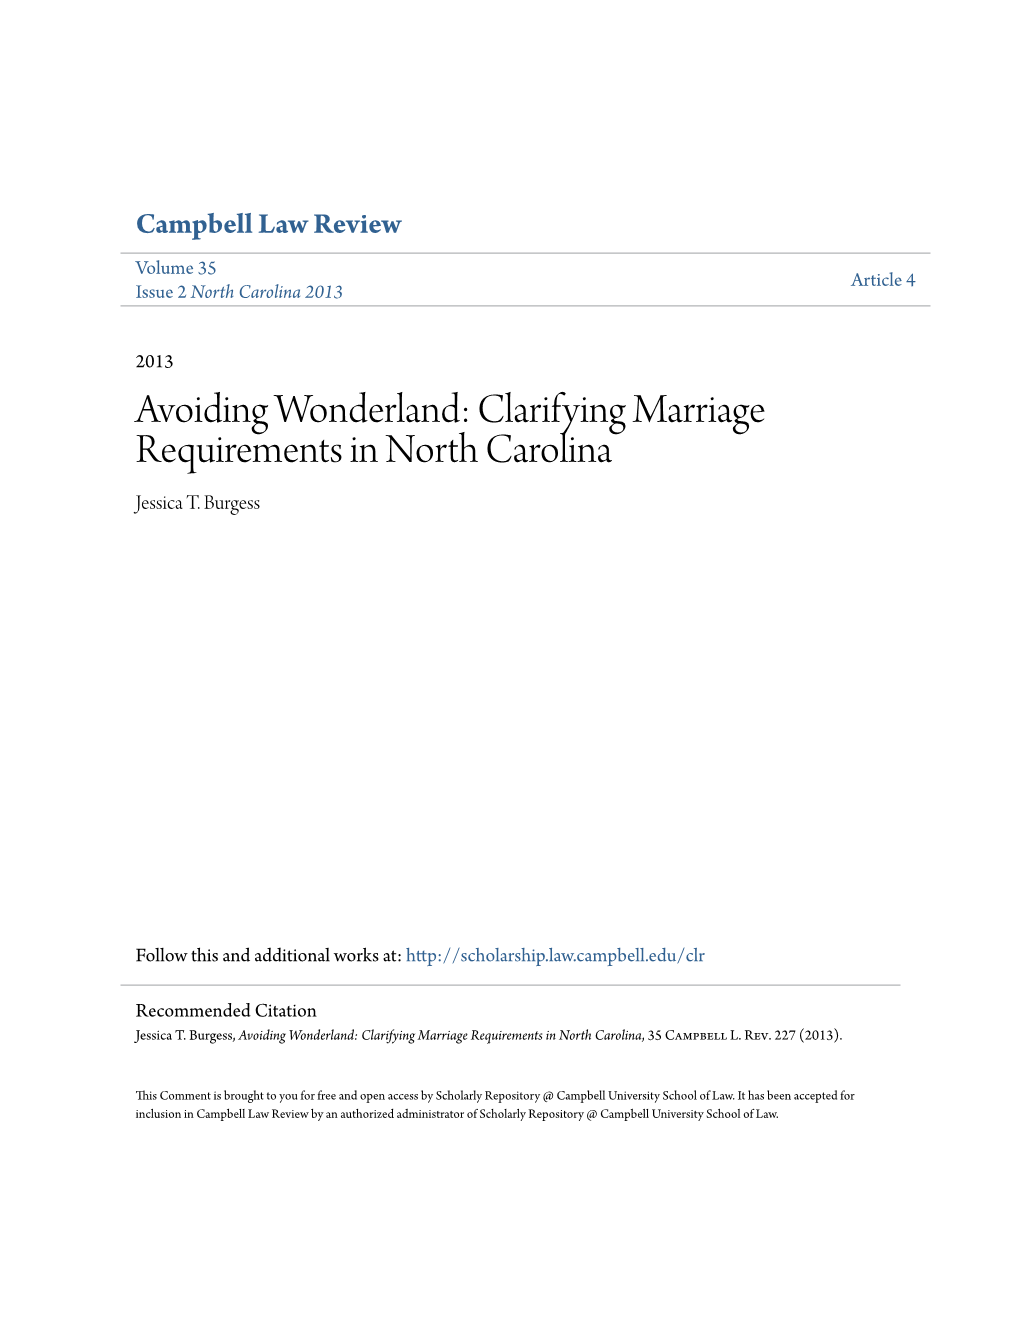 Clarifying Marriage Requirements in North Carolina Jessica T